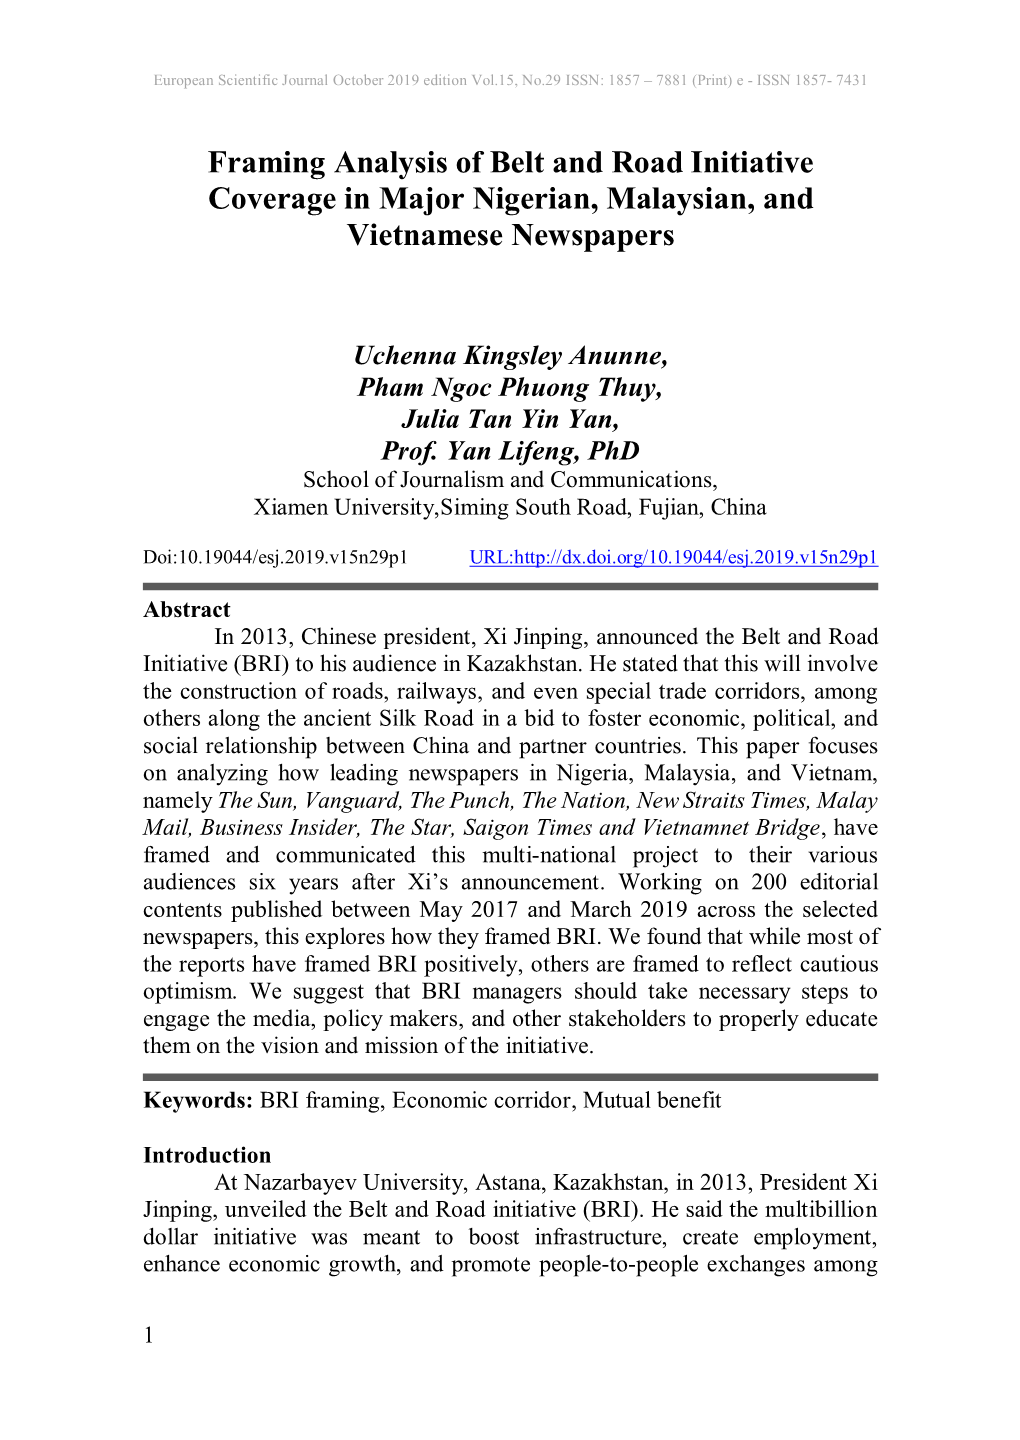 Framing Analysis of Belt and Road Initiative Coverage in Major Nigerian, Malaysian, and Vietnamese Newspapers